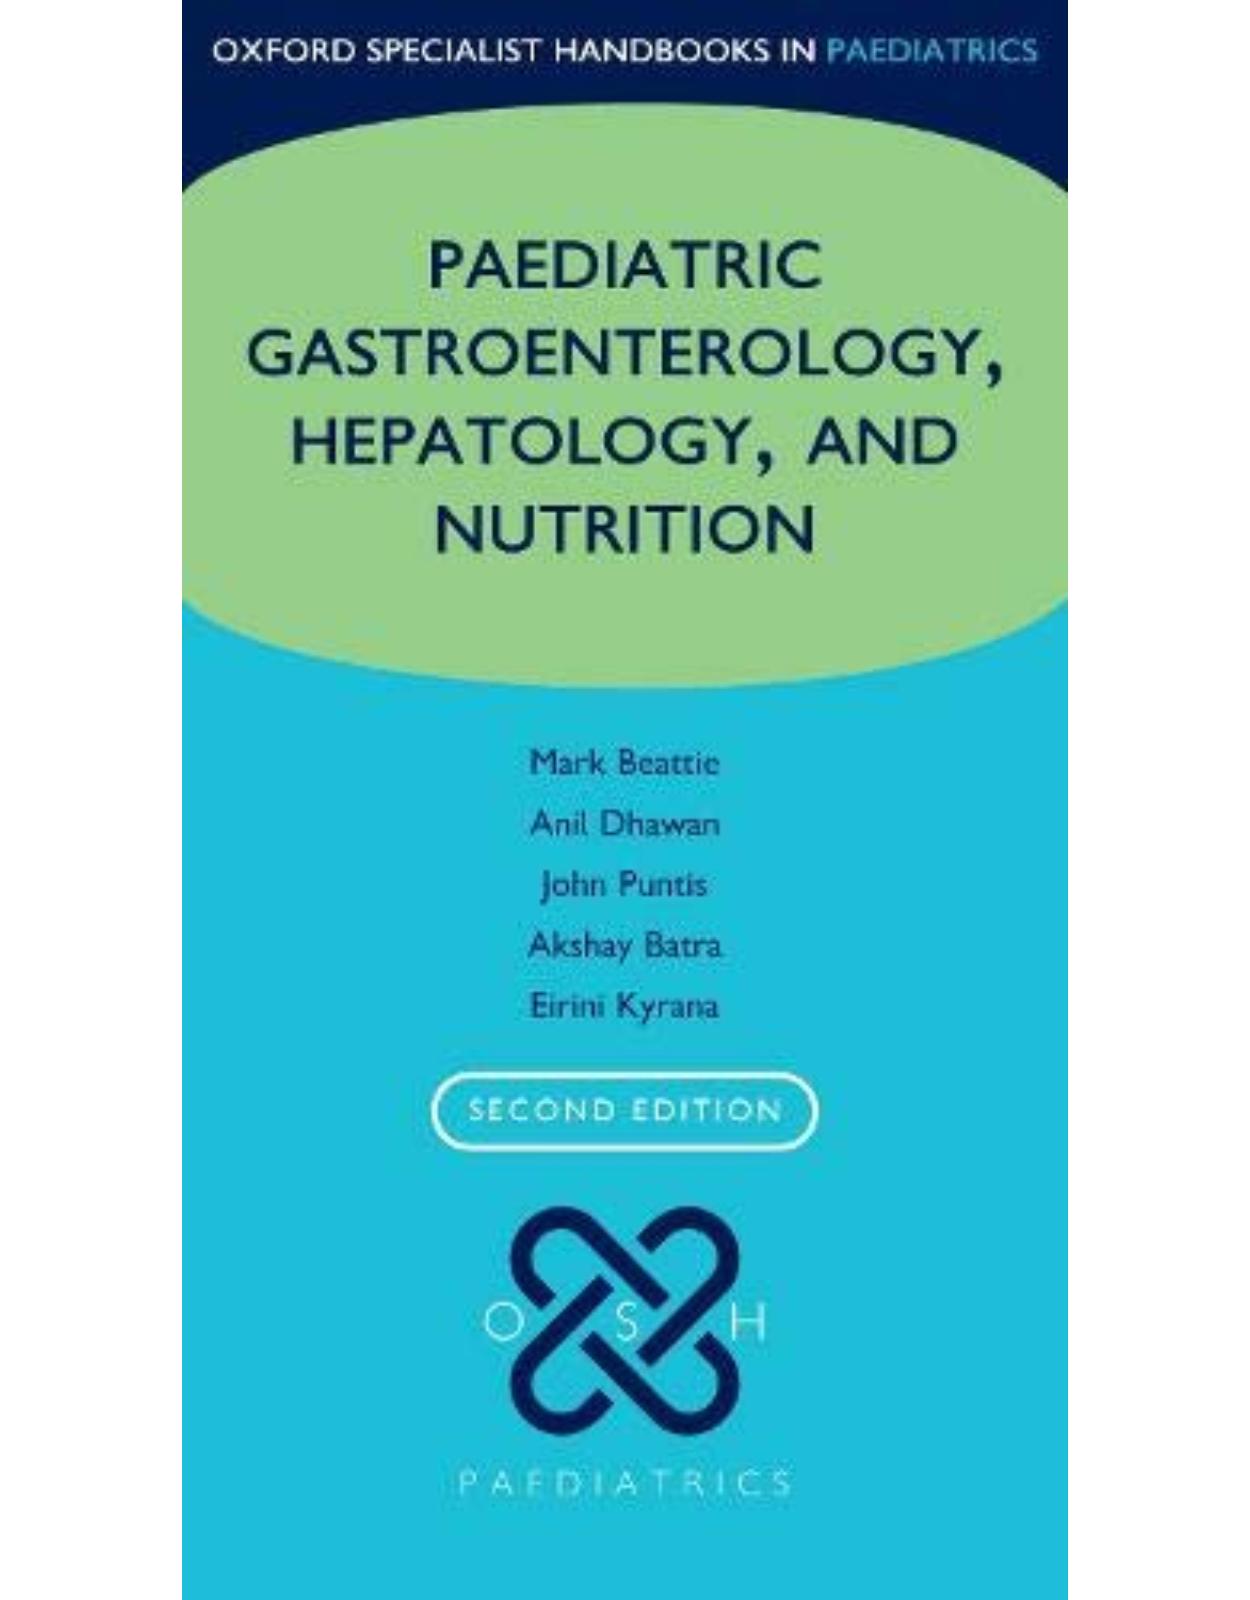 Oxford Specialist Handbook of Paediatric Gastroenterology, Hepatology, and Nutrition 